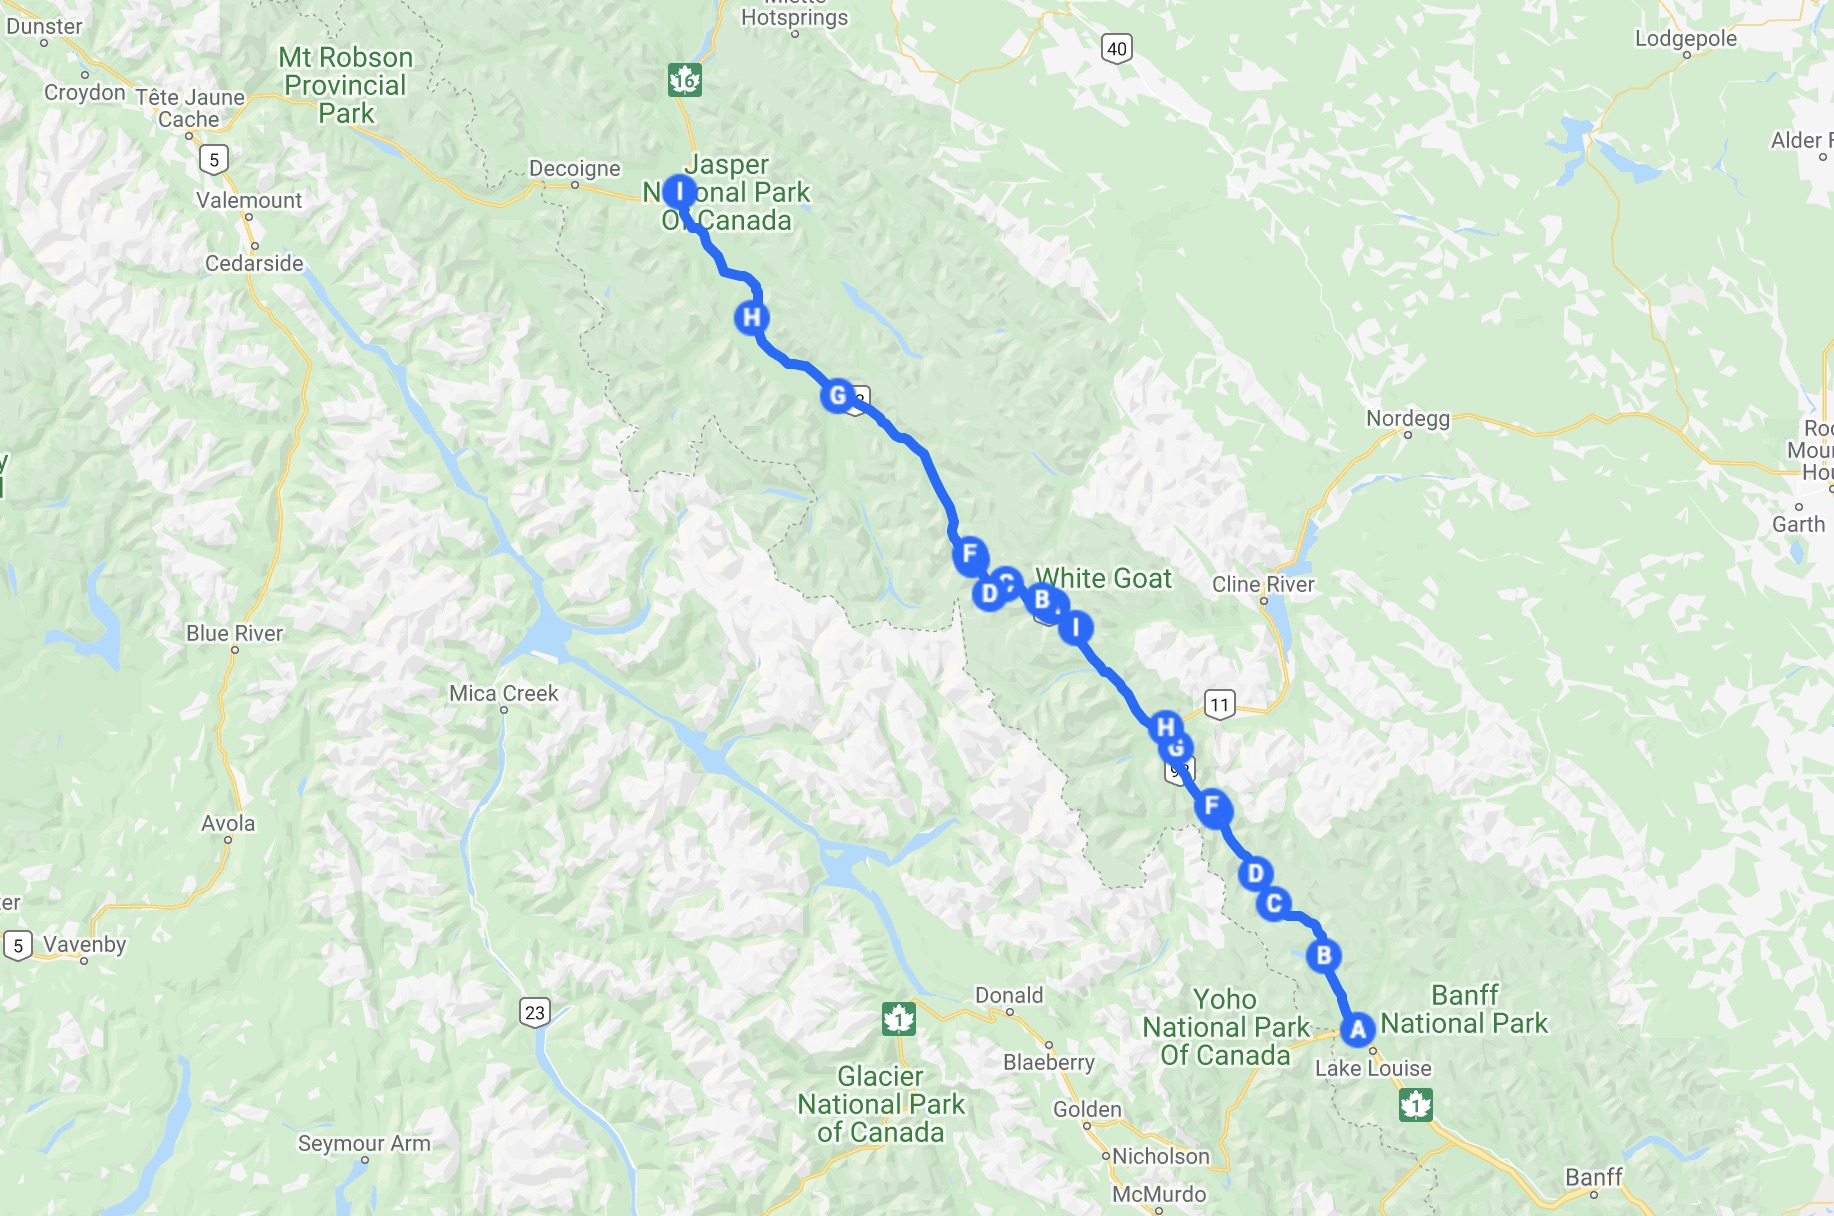 map of the icefields parkway